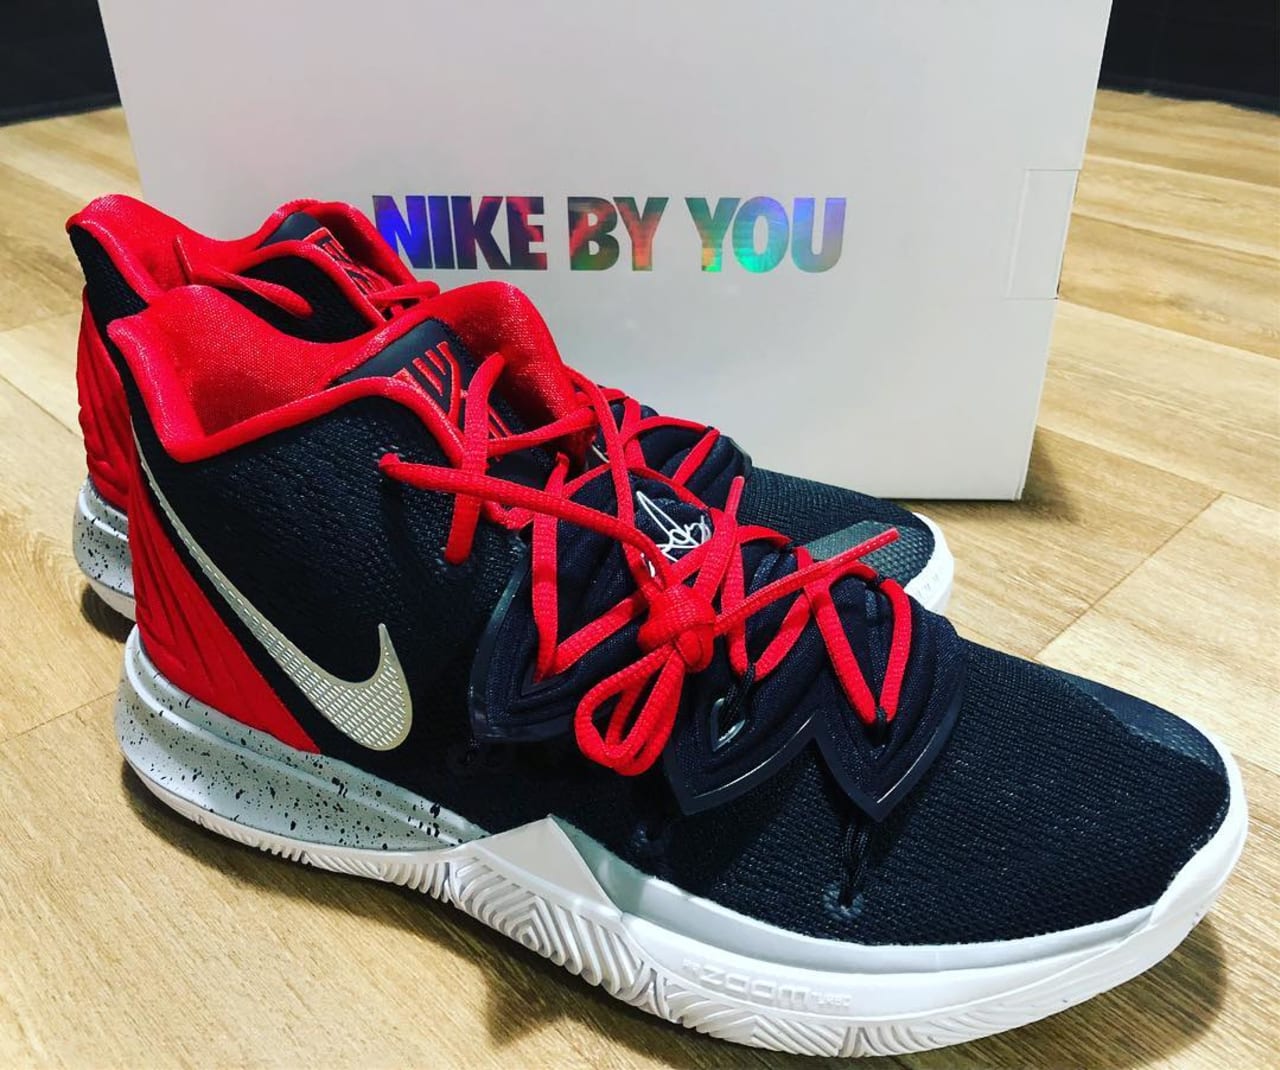 kyrie 5 by you